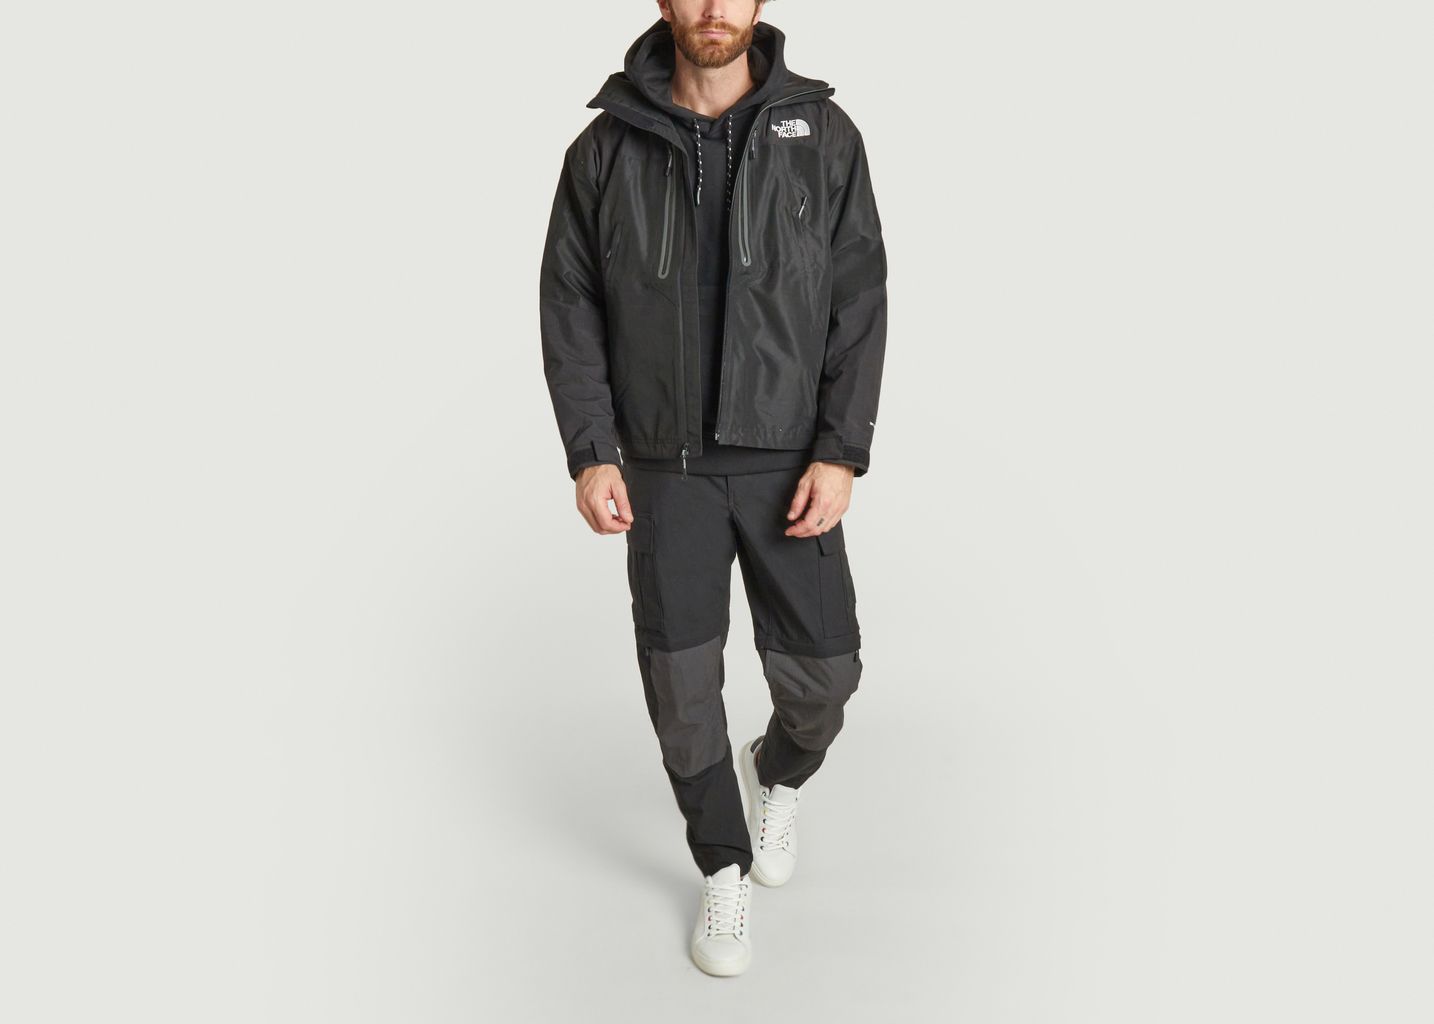 Transverse Dryevent jacket  - The North Face